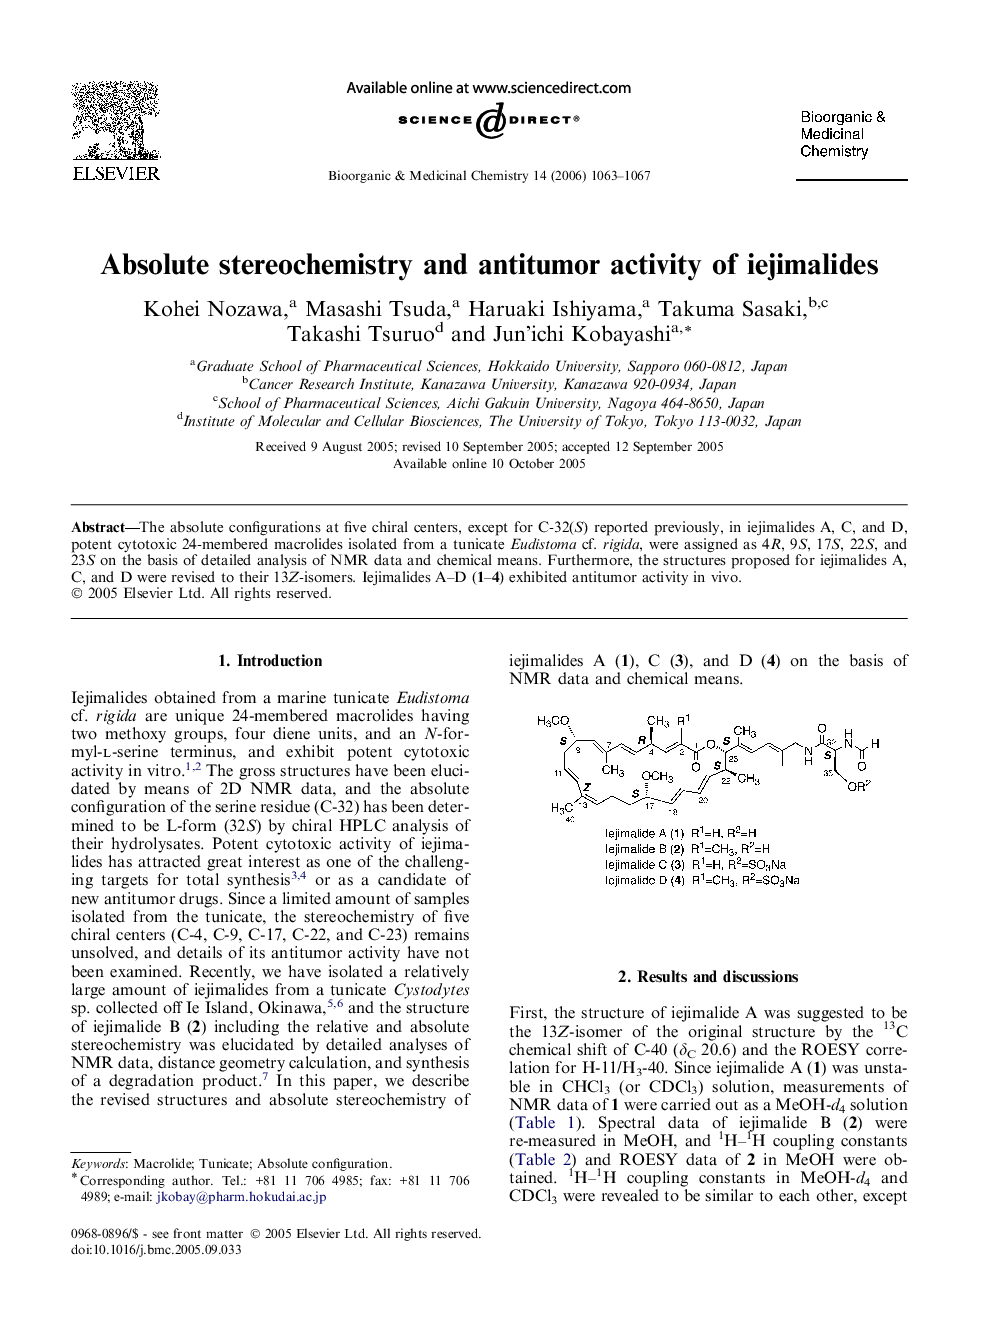 Absolute stereochemistry and antitumor activity of iejimalides